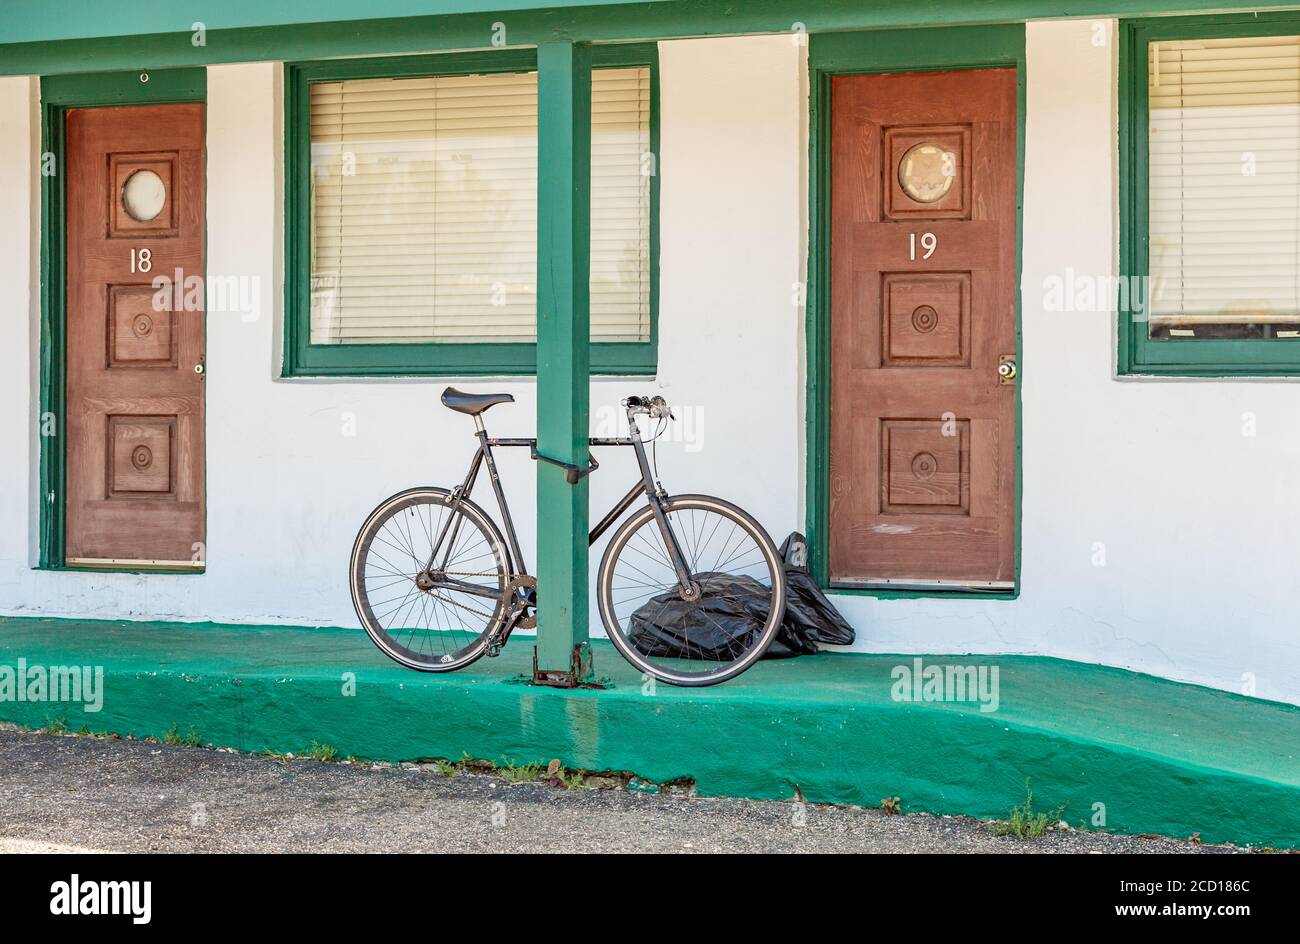 Bicycle sitting in front of two rooms at the Memory Motel in Montauk, NY Stock Photo